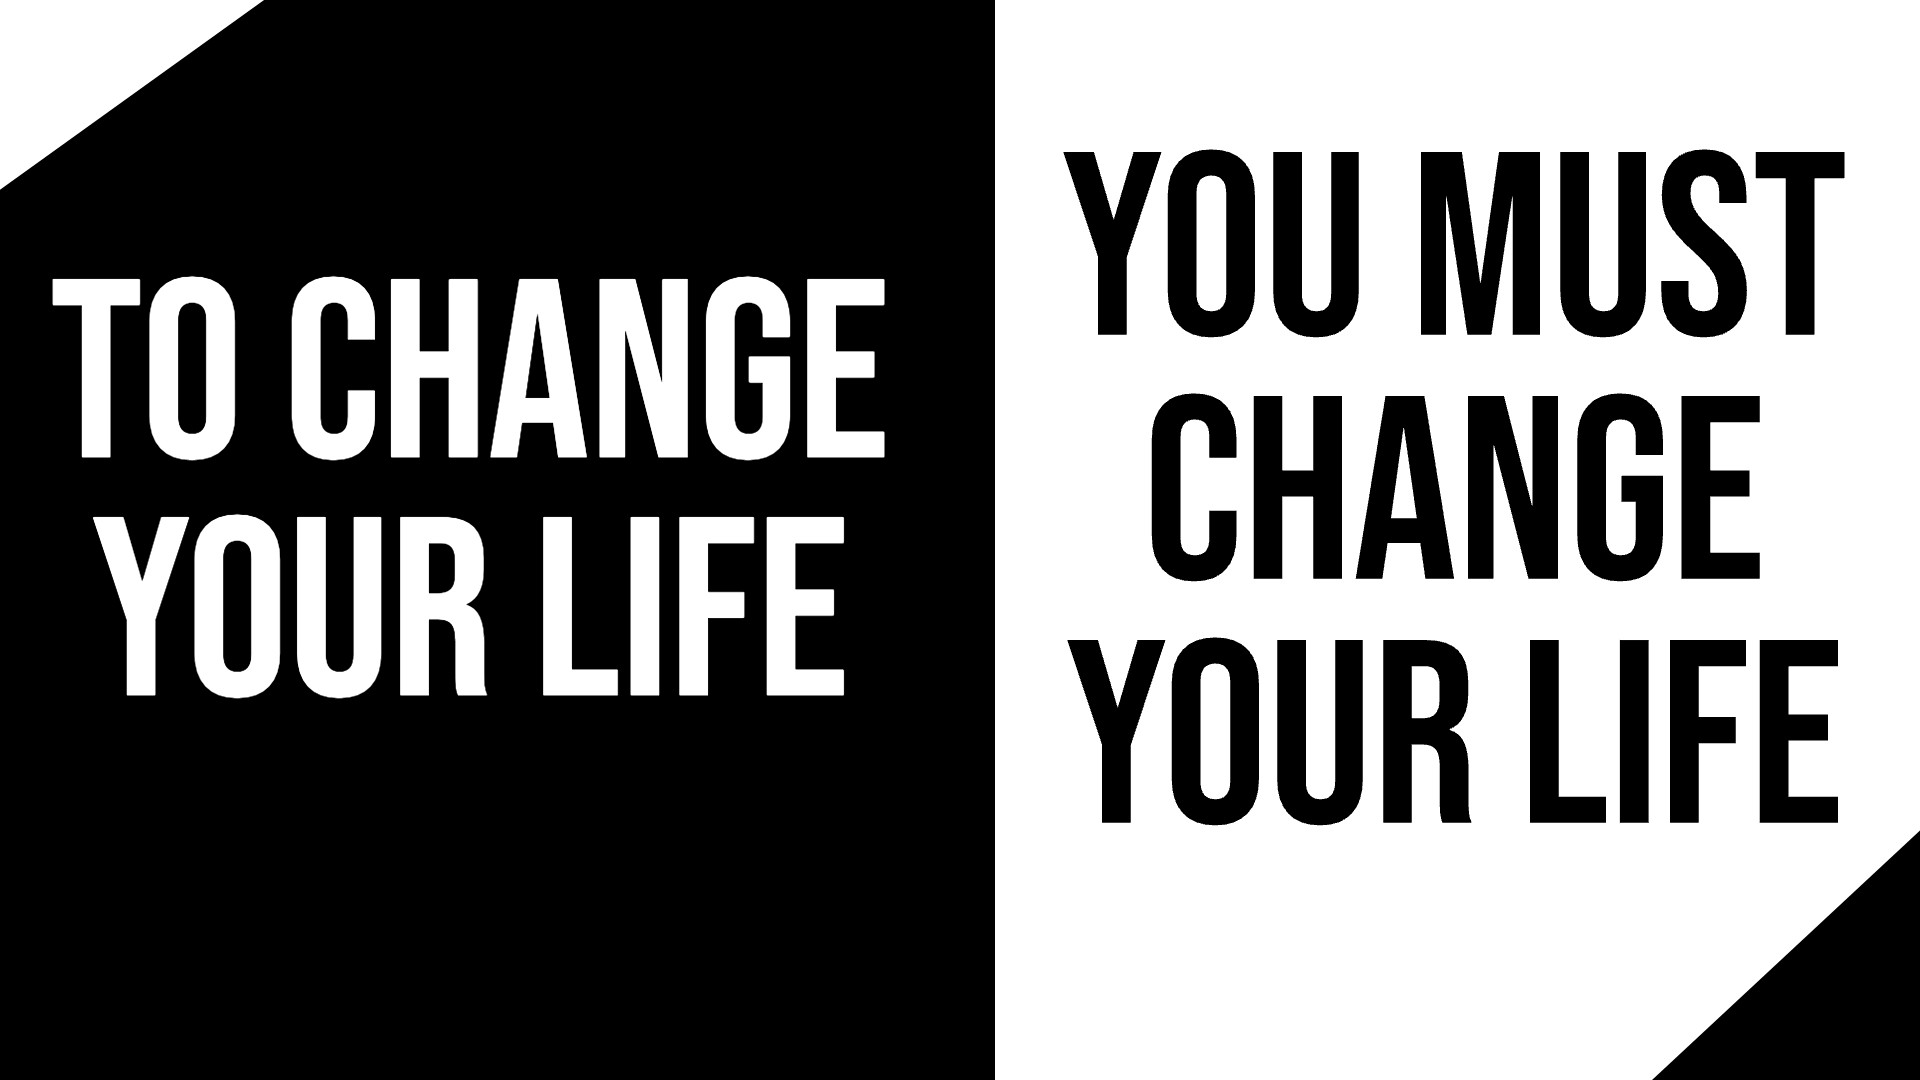 To Change Your Life You Must Change Your Life